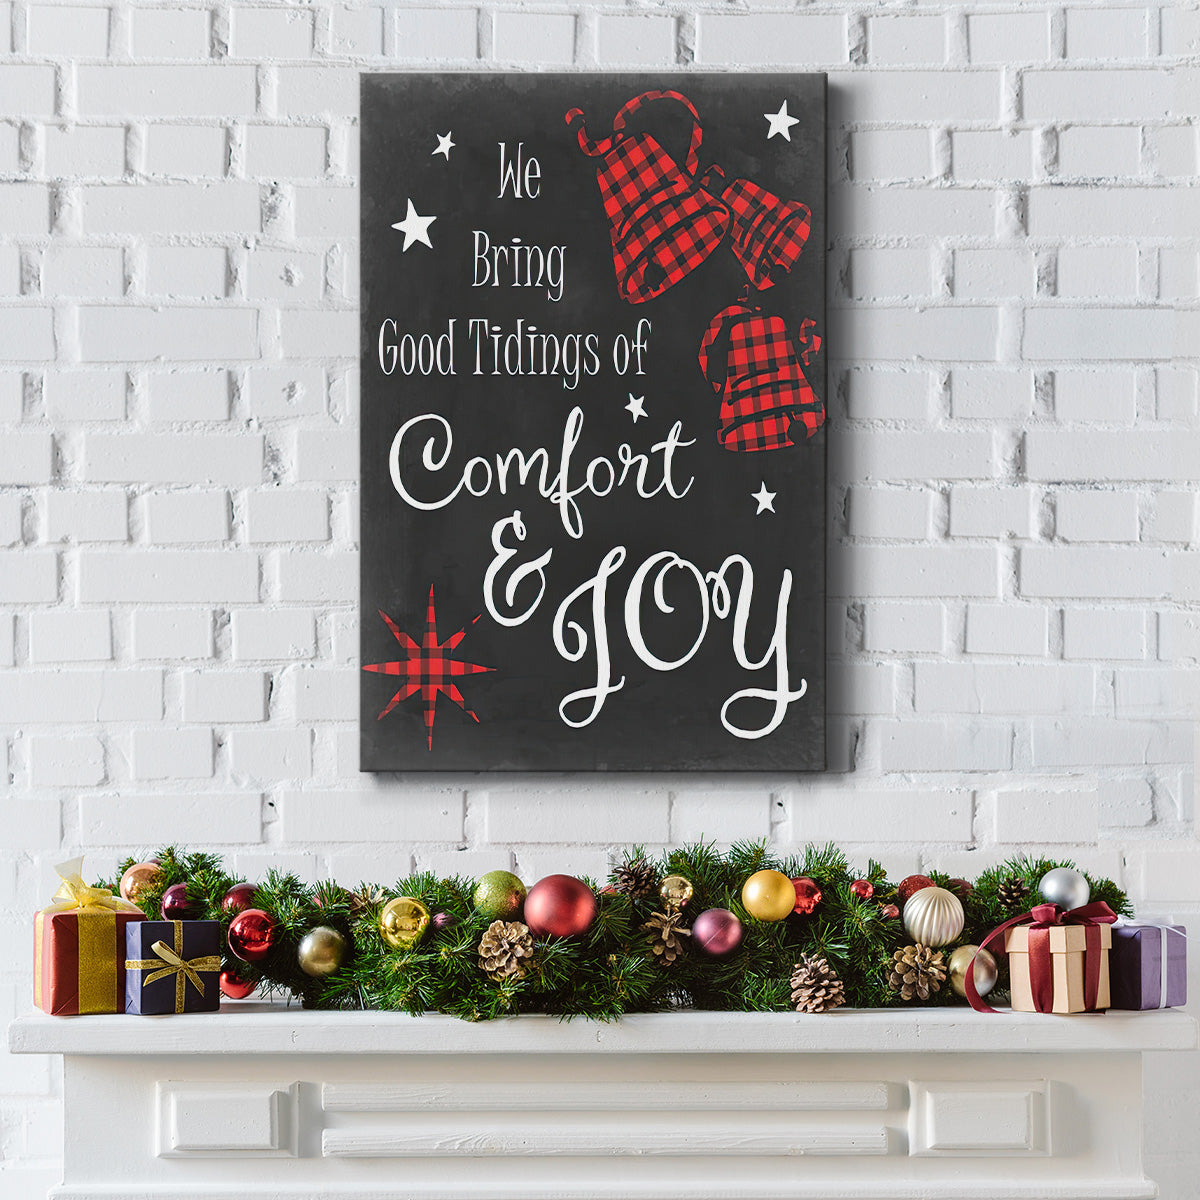 Comfort and Joy in Red - Gallery Wrapped Canvas